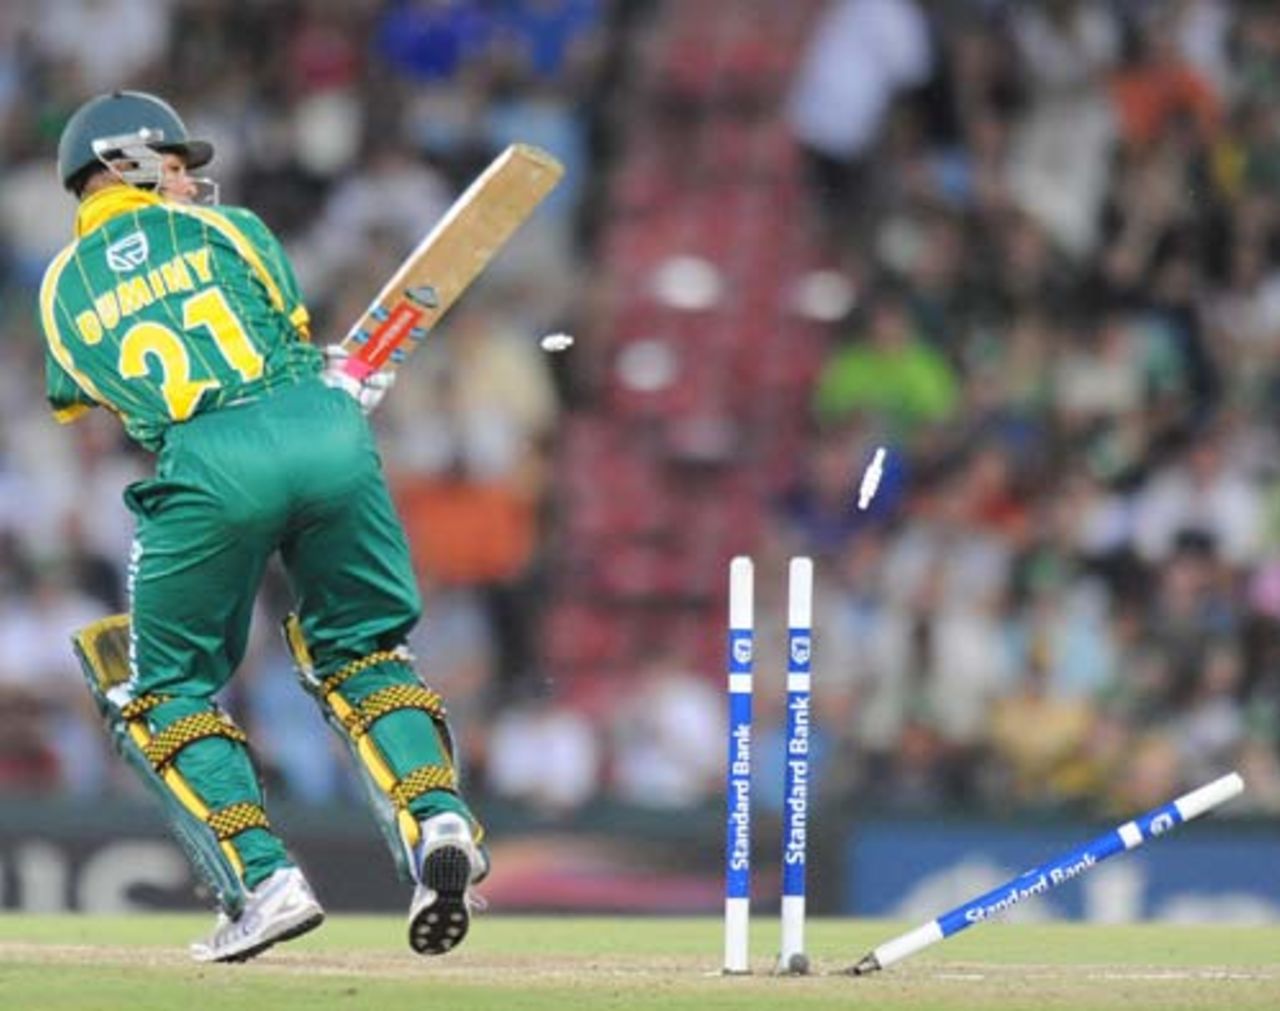 JP Duminy is bowled attempting a cheeky shot, South Africa v Australia, 2nd Twenty20, Centurion, March 29, 2009